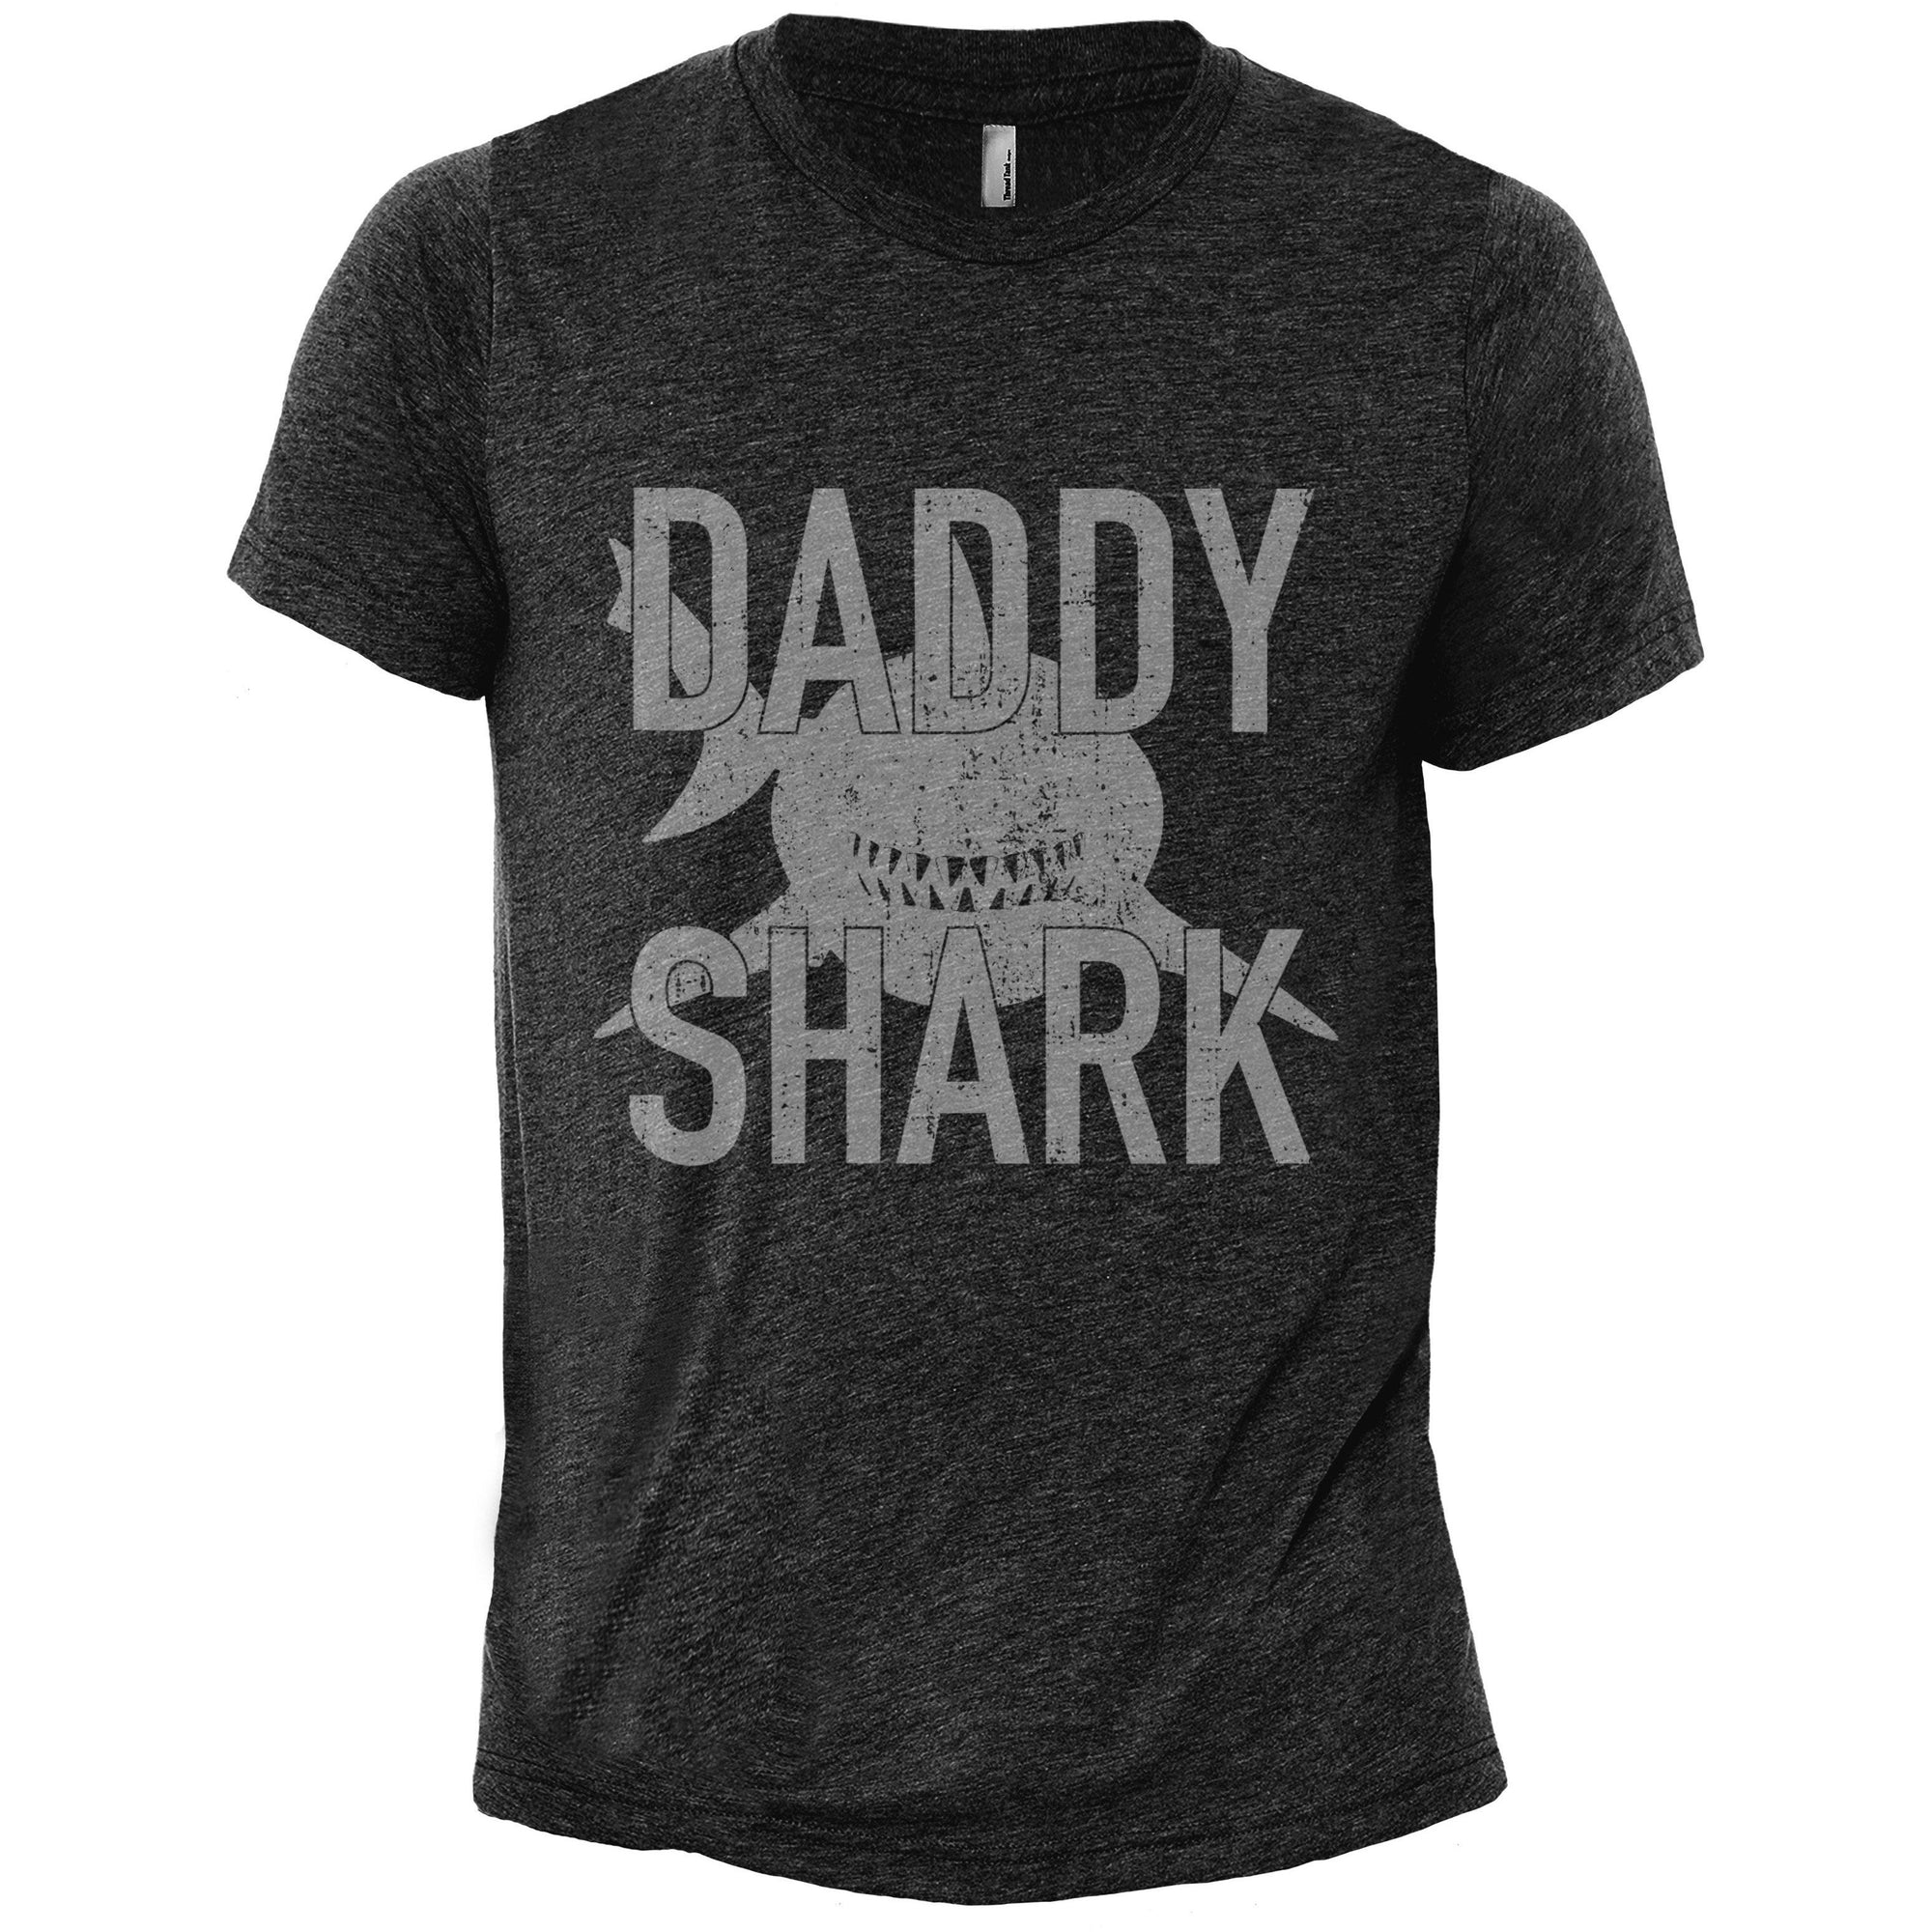 Daddy Shark Charcoal Printed Graphic Men's Crew T-Shirt Tee